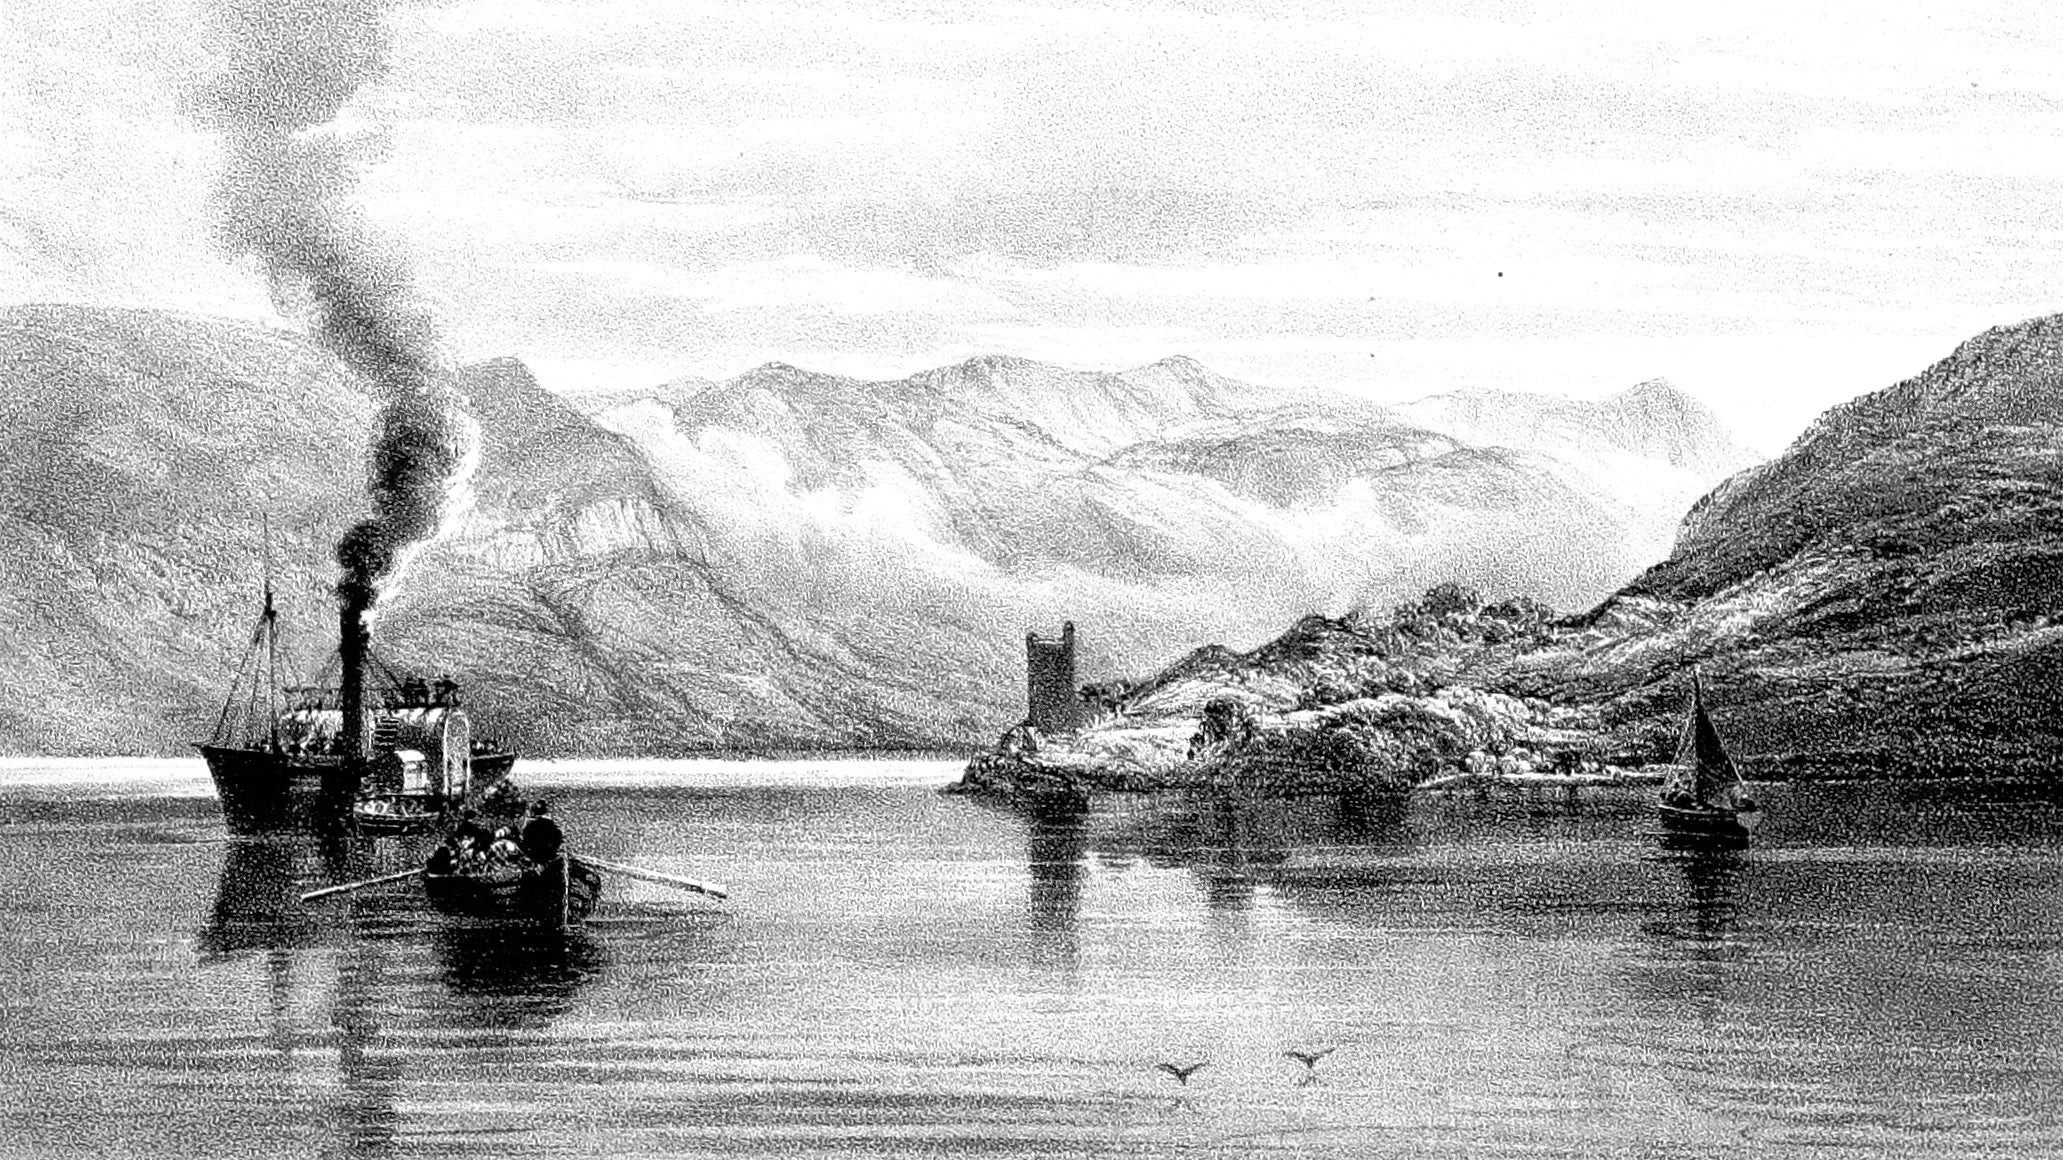 A steamboat, rowboat, and sailboat on the water of Loch Ness by Urquhart Castle in an illustration from 'Maclure and Macdonald's series of guide to the Highlands of Scotland'.